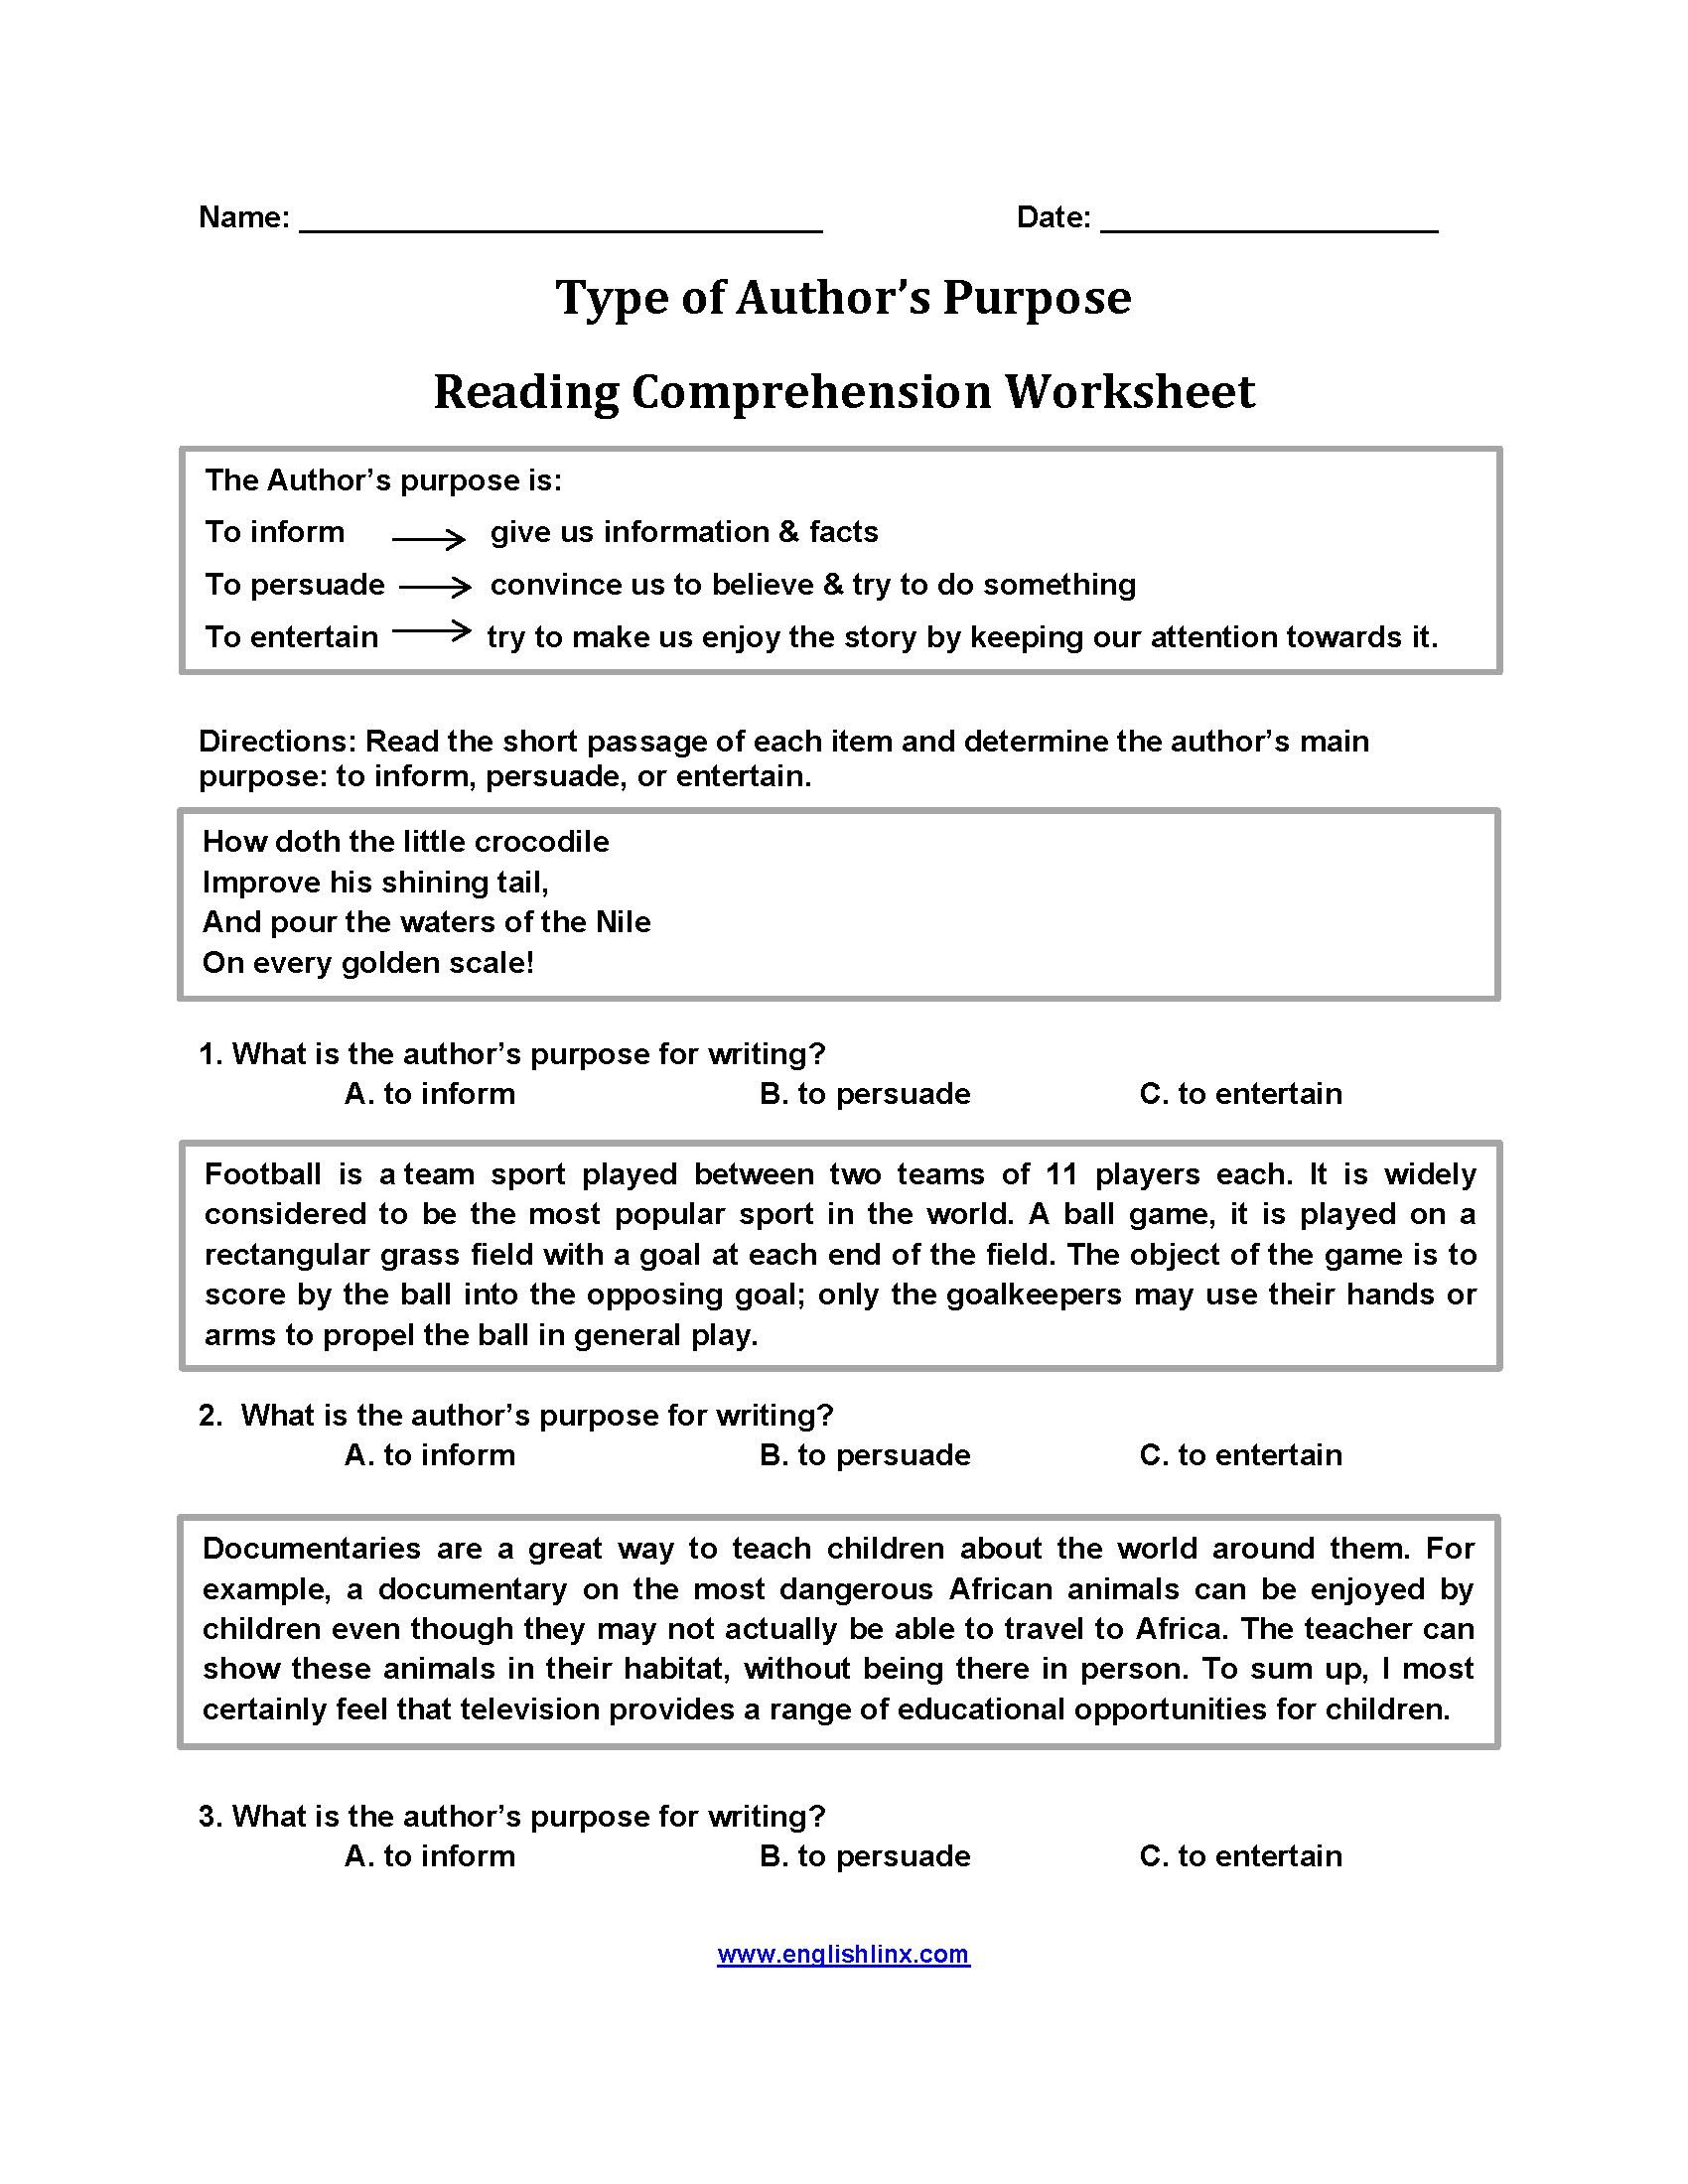 Type of Author's Purpose Worksheets